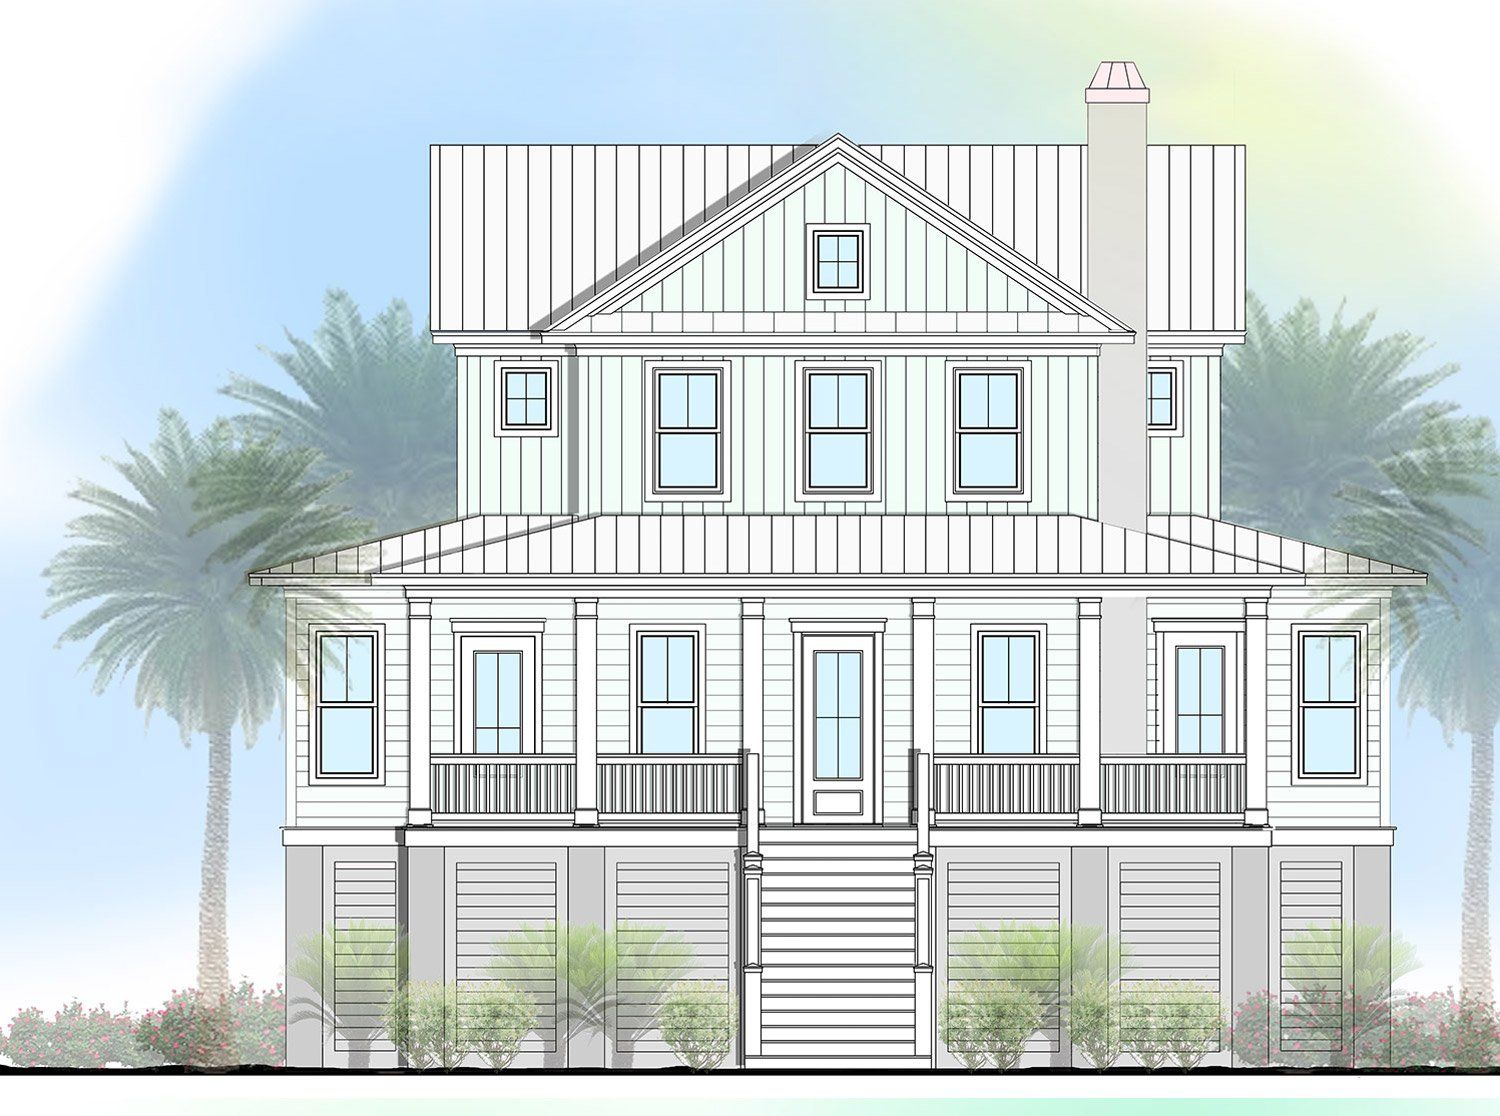 a drawing of a house with palm trees in the background .